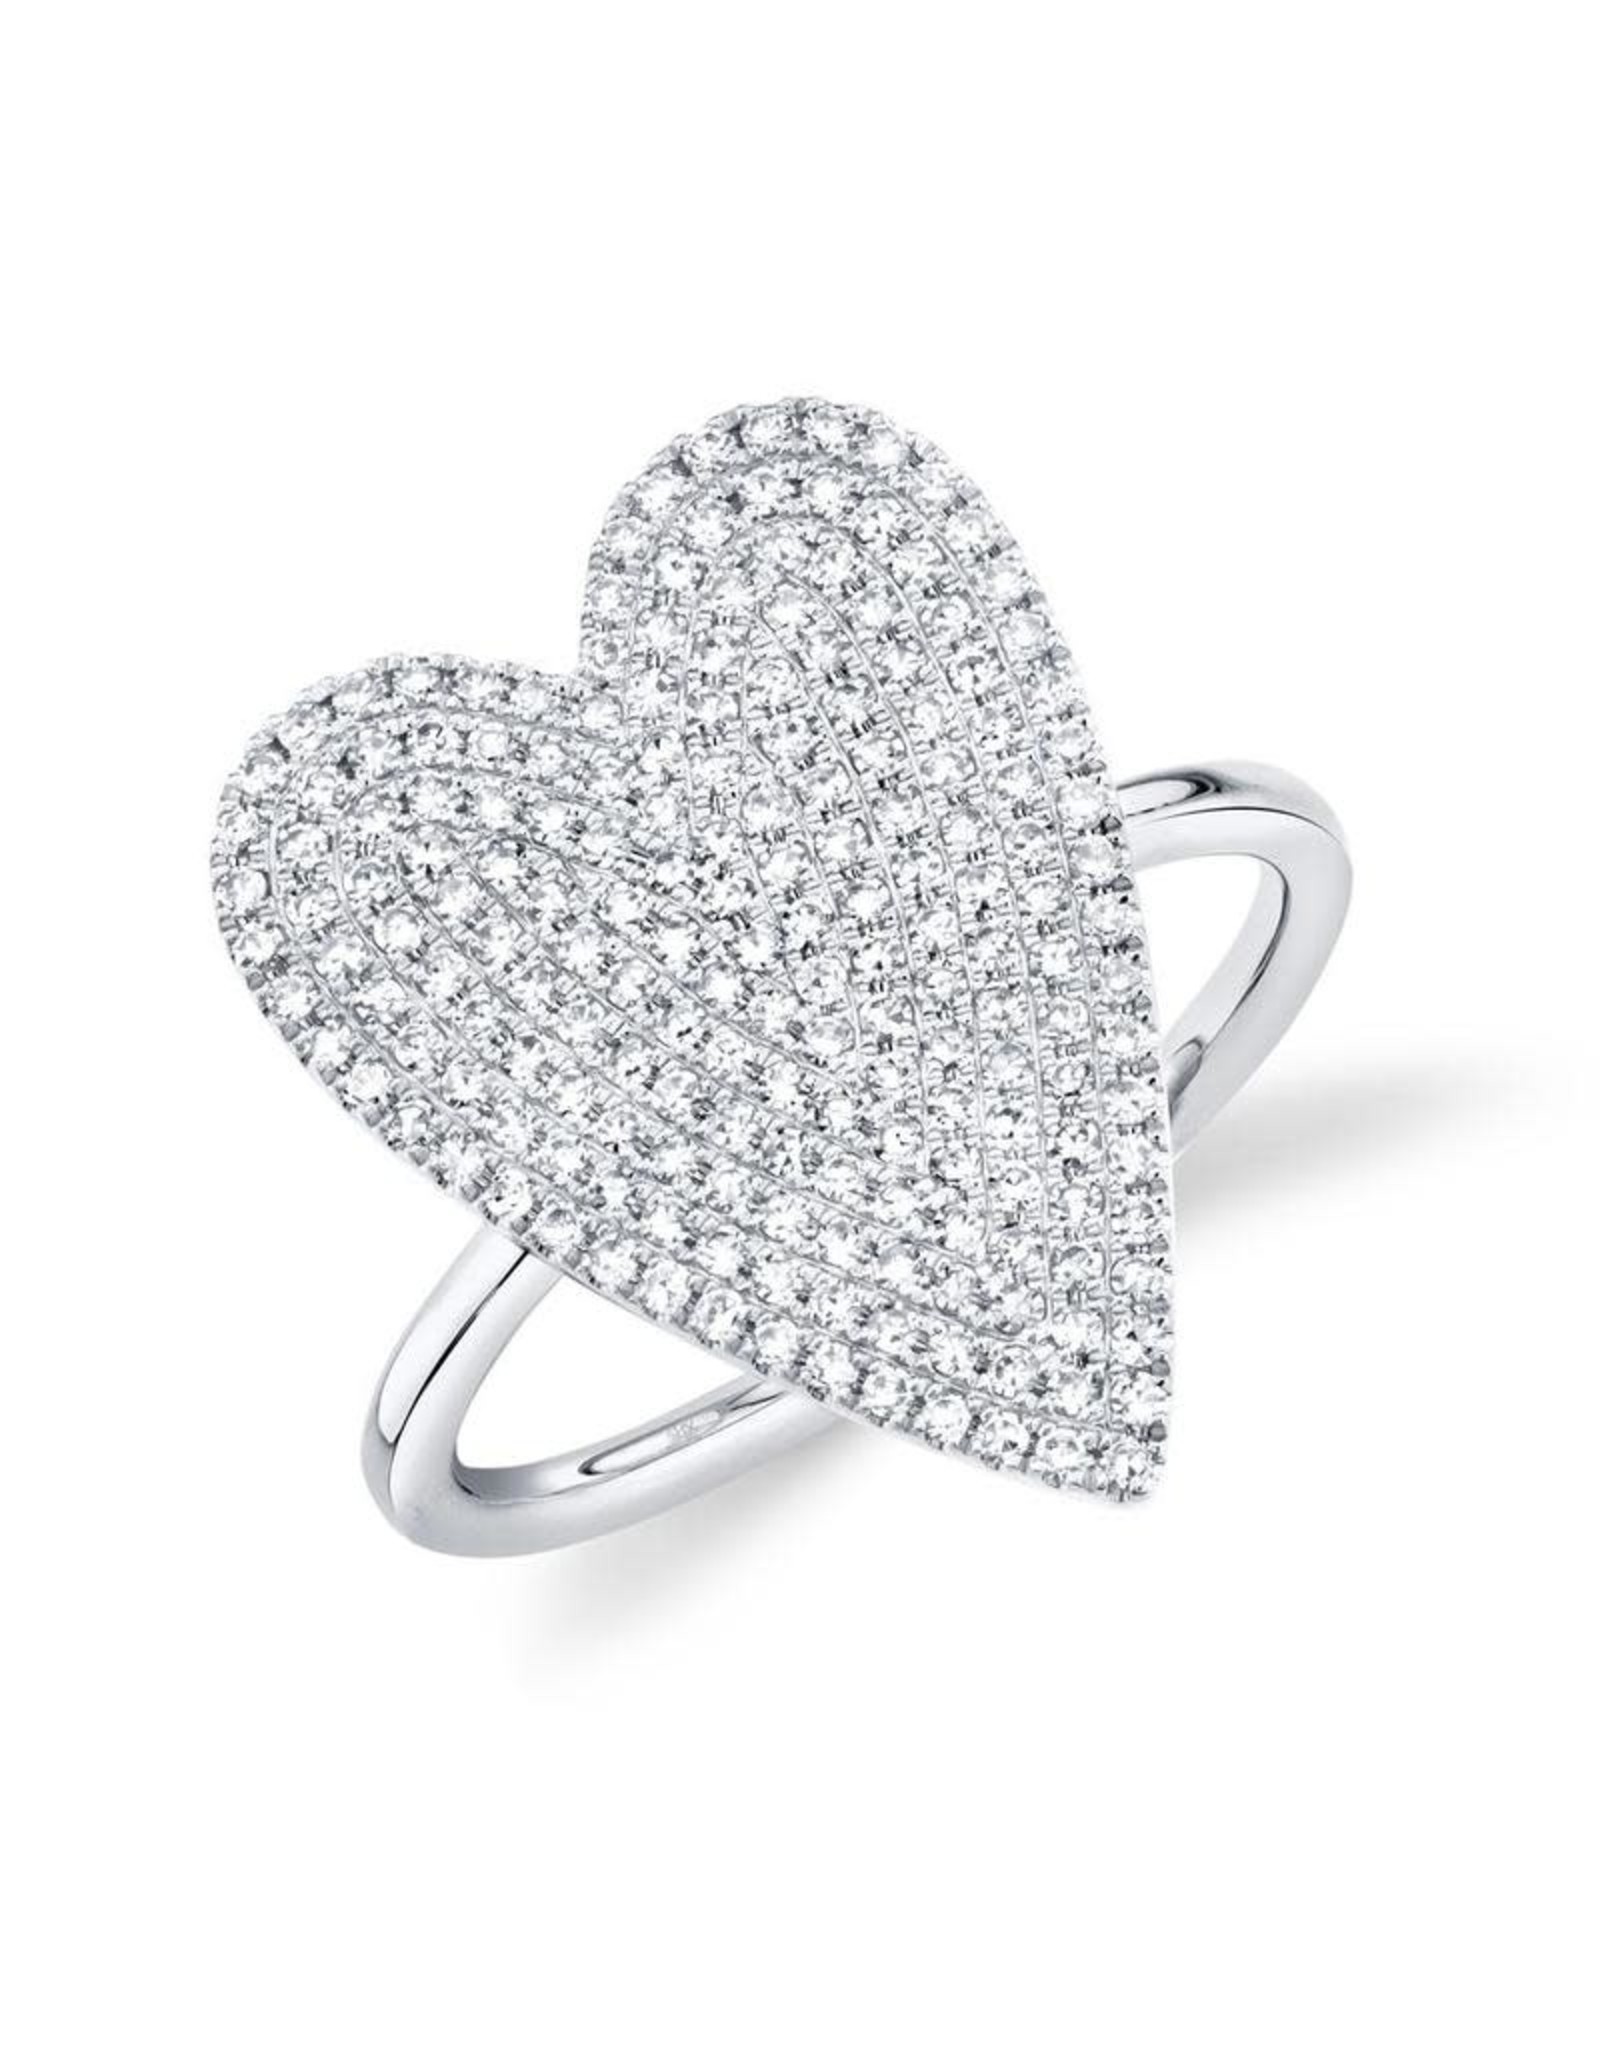 14K White Gold Statement Diamond Pave Heart Ring, D: 0.26ct